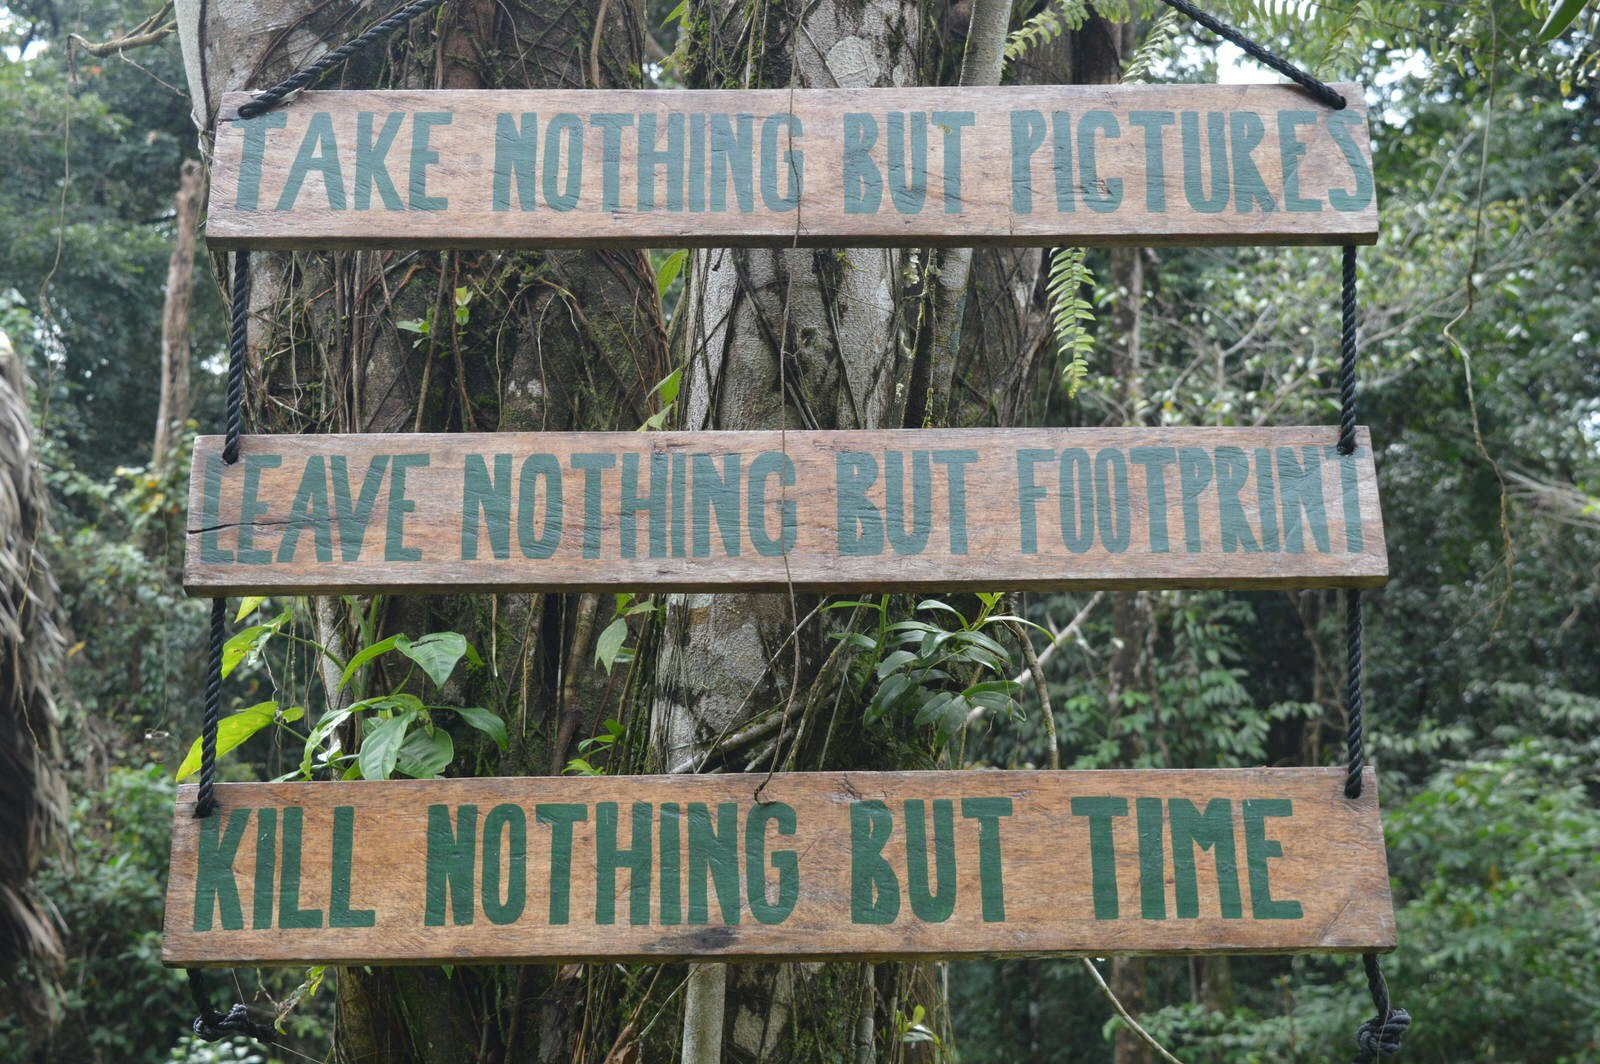 A wooden sign in front of a jungle reading 'take nothing but pictures, leave nothing but footprints, kill nothing but time'